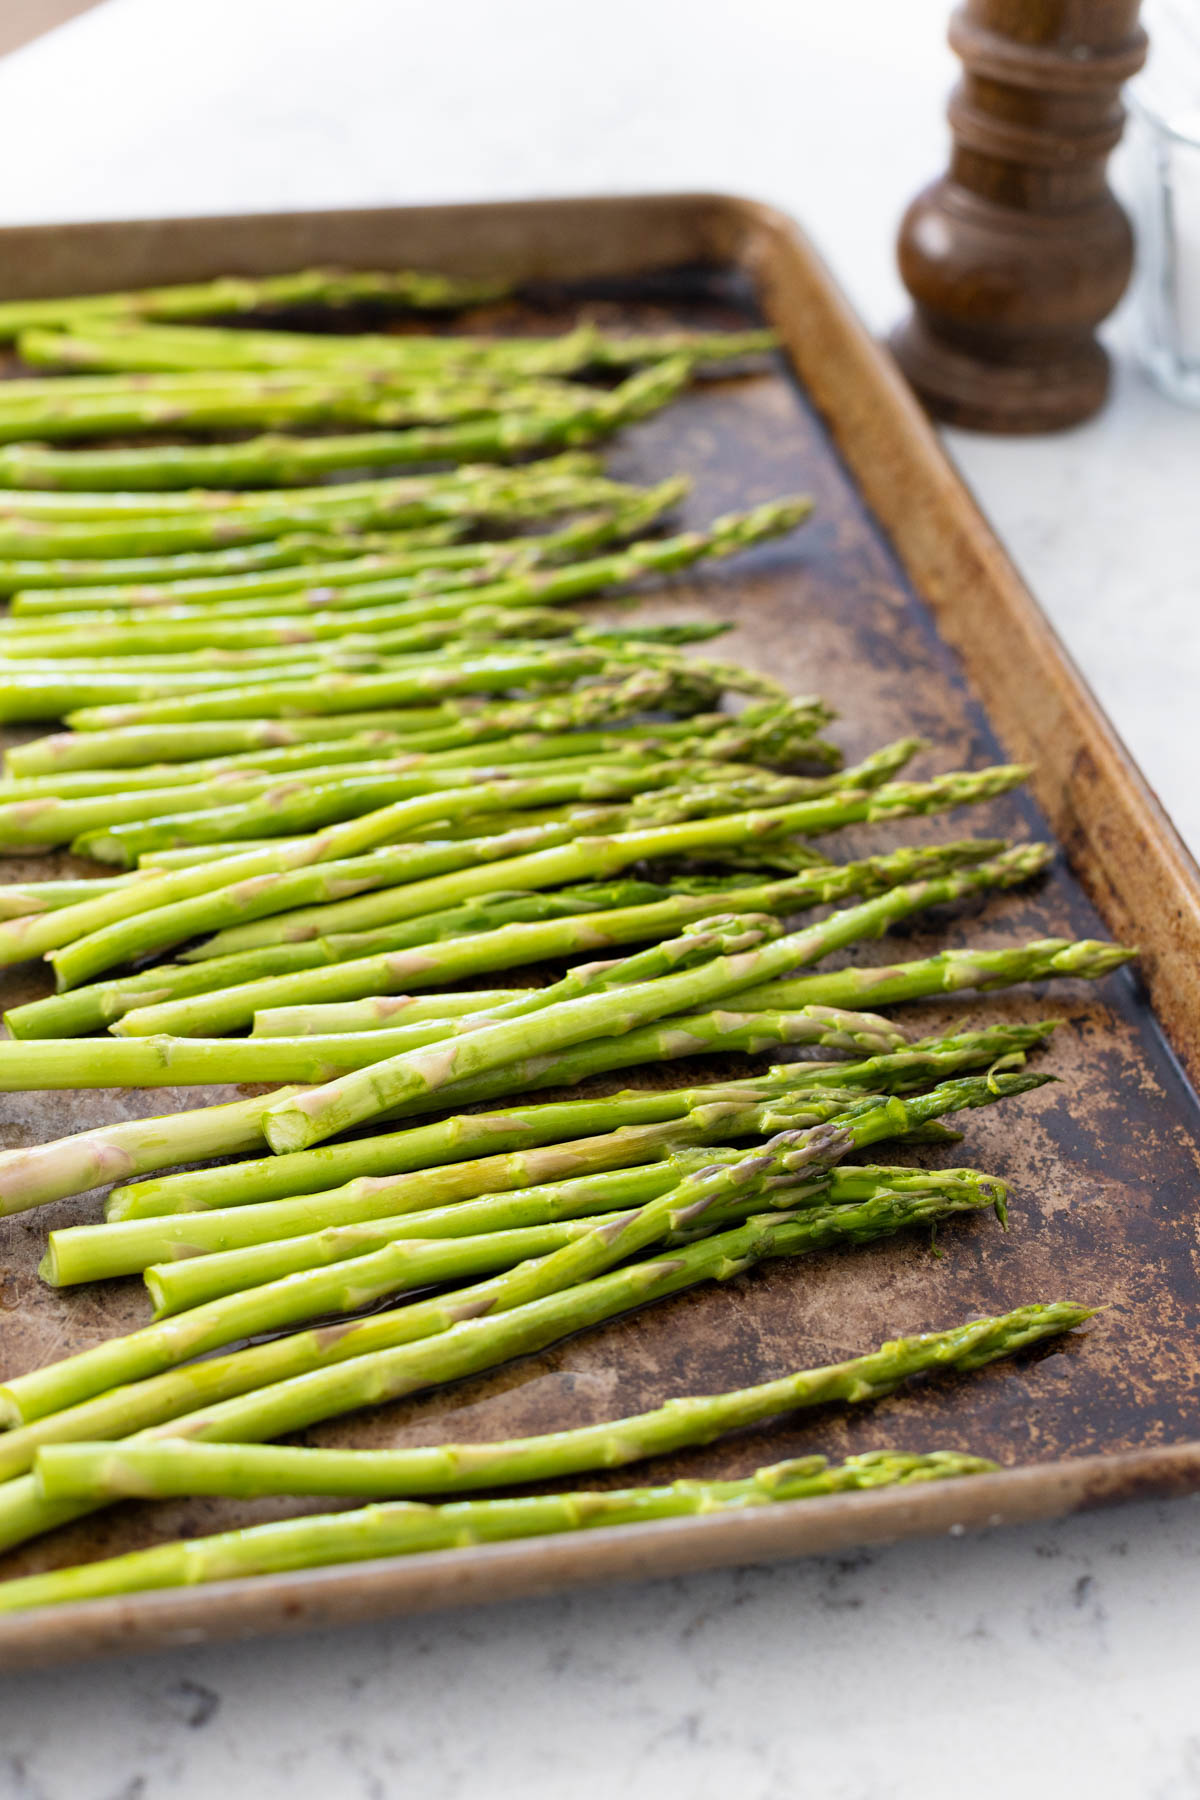 The olive oil, salt, and pepper have been added to the fresh asparagus spears.